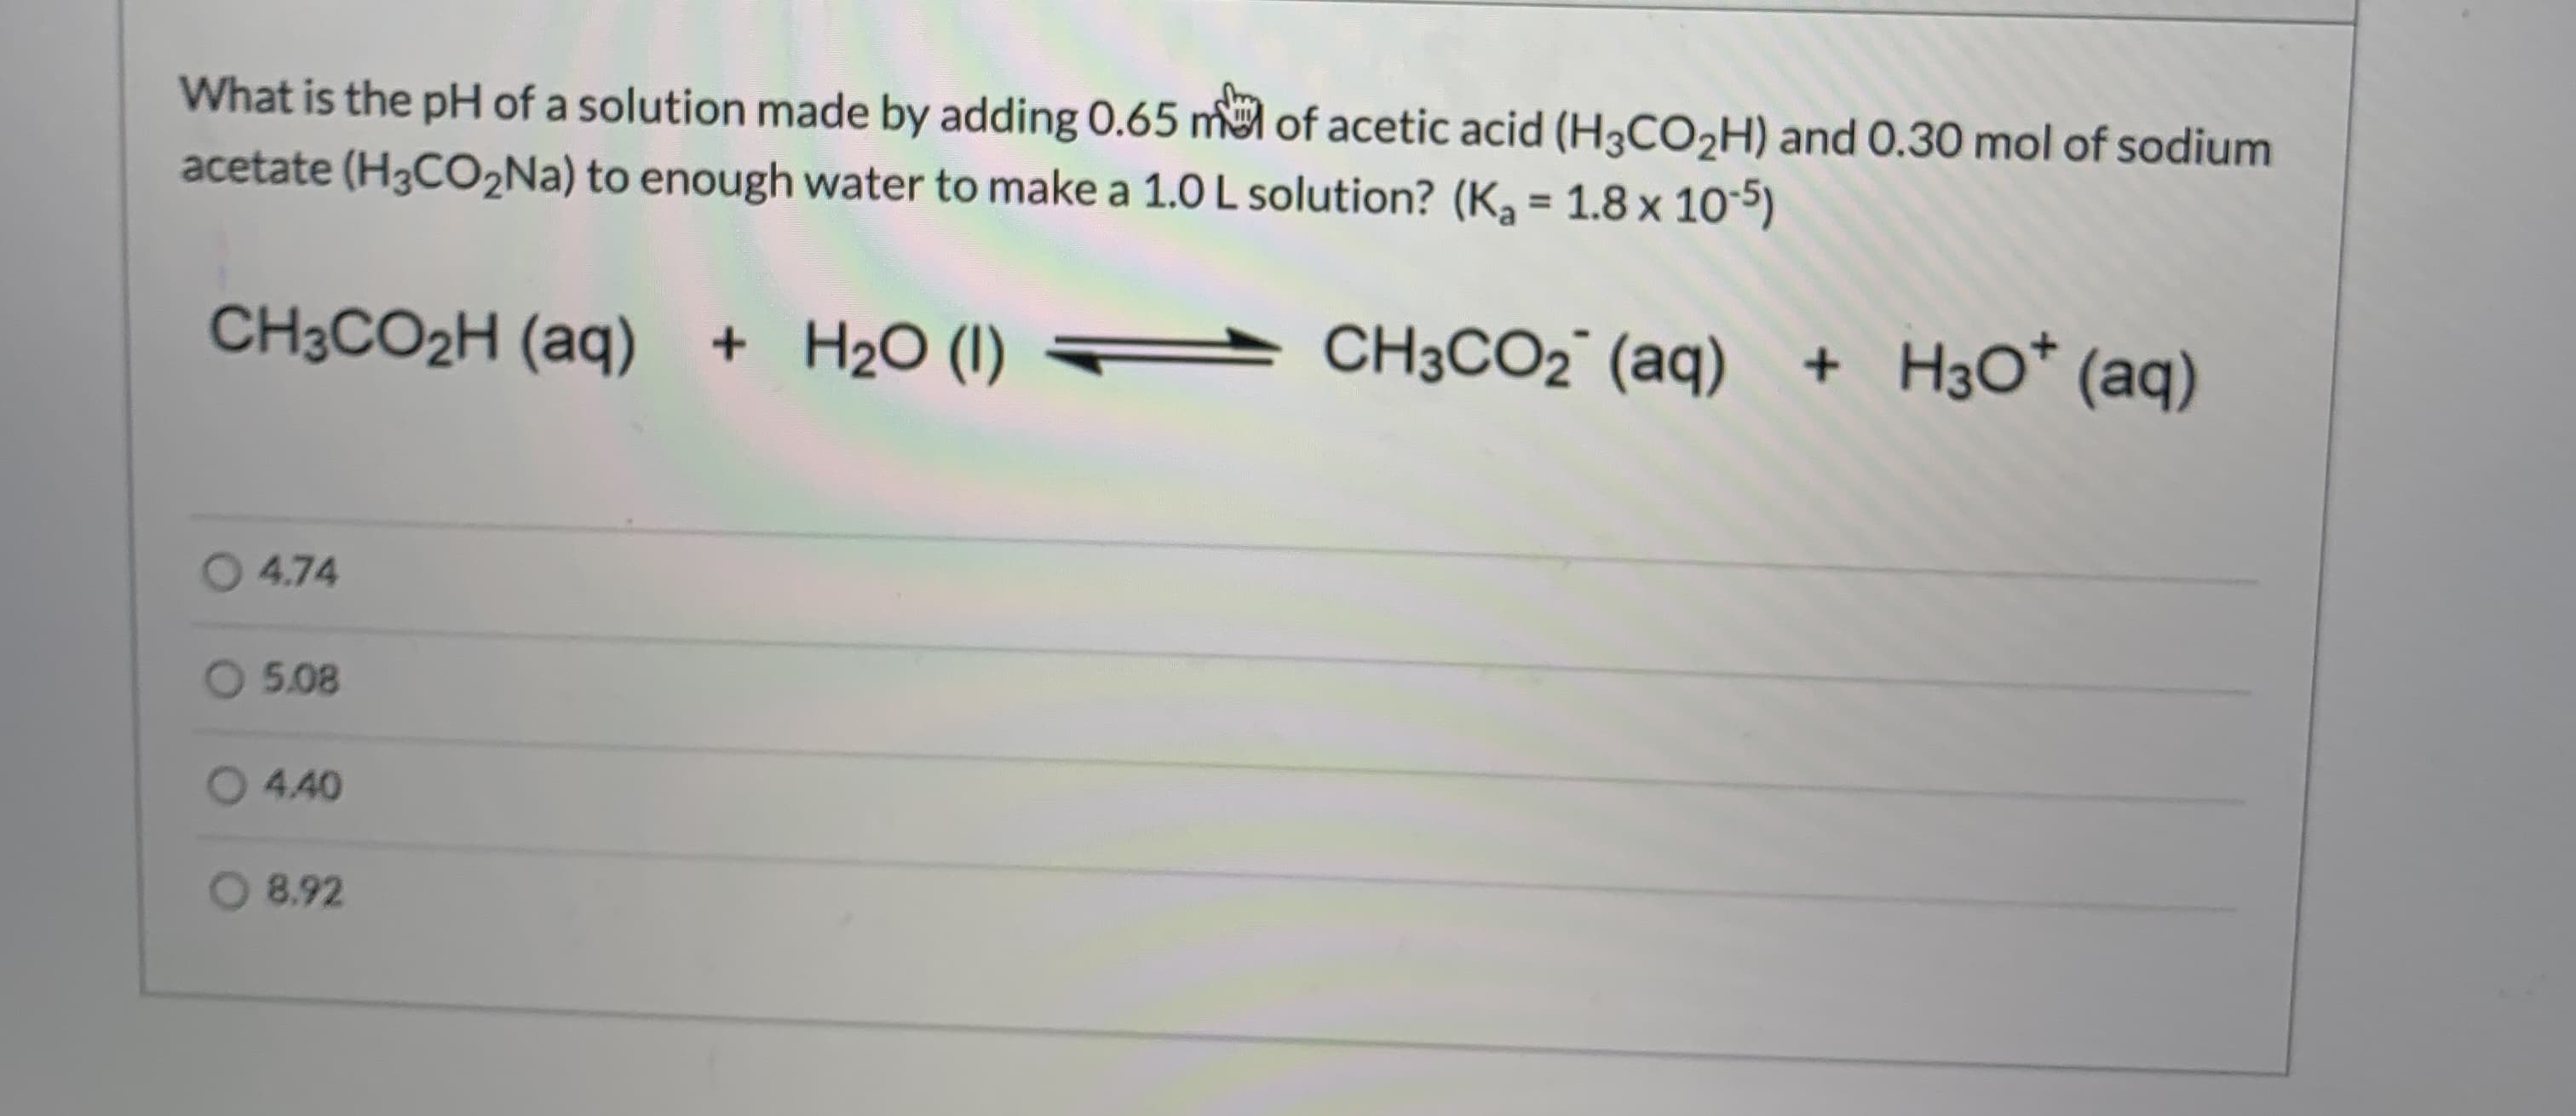 What is the pH of a solution made by adding 0.65 m of acetic acid (H3CO2H) and 0.30 mol of sodium
acetate (H3CO2Na) to enough water to make a 1.0 L solution? (K, = 1.8 x 105)
%3D
CH3CO2H (aq)
+ H2O (1)
CH3CO2° (aq) + H3O* (aq)
4.74
O 5.08
04.40
8.92
